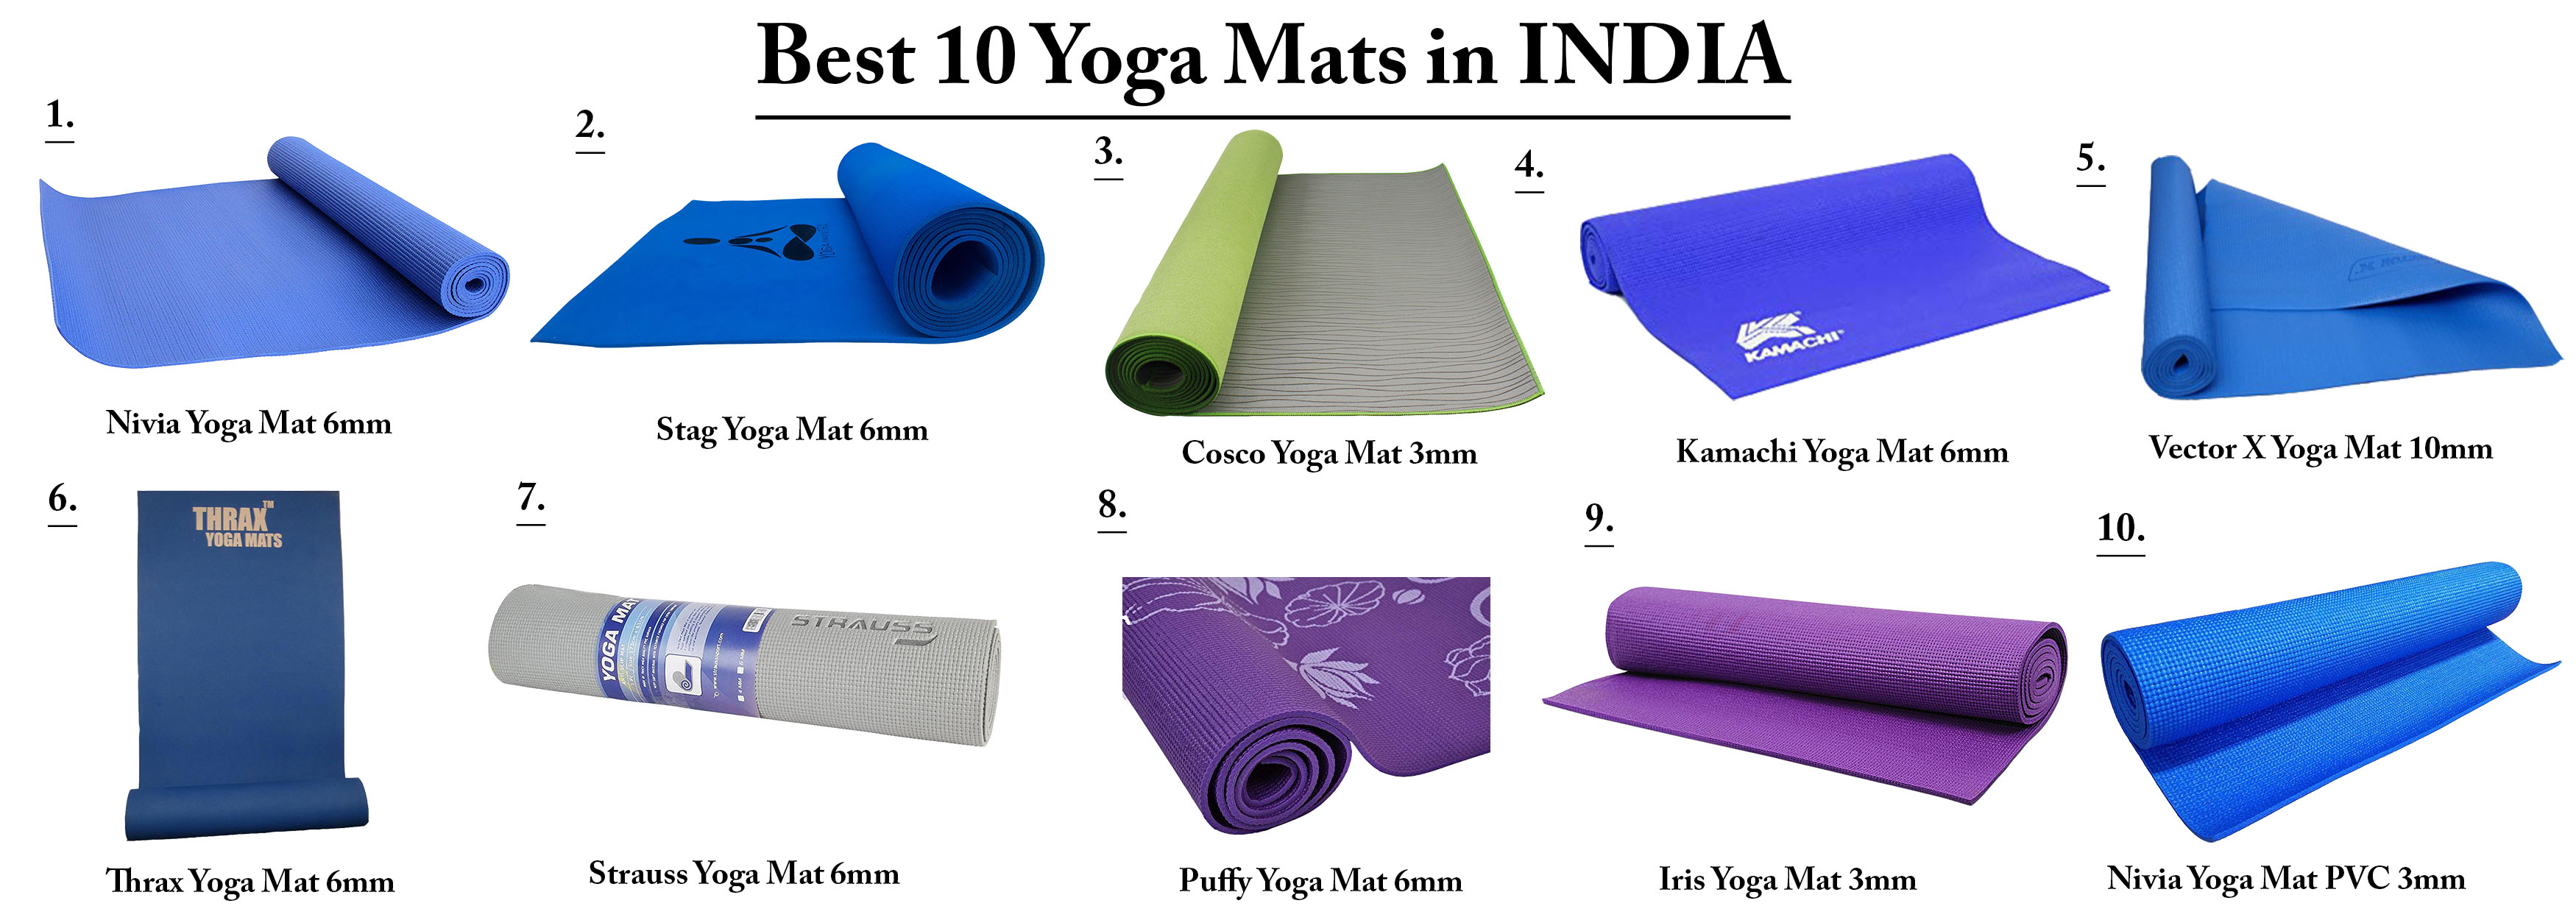 4 Best Yoga Mats in India⚡ Tested & Compared⚡ 